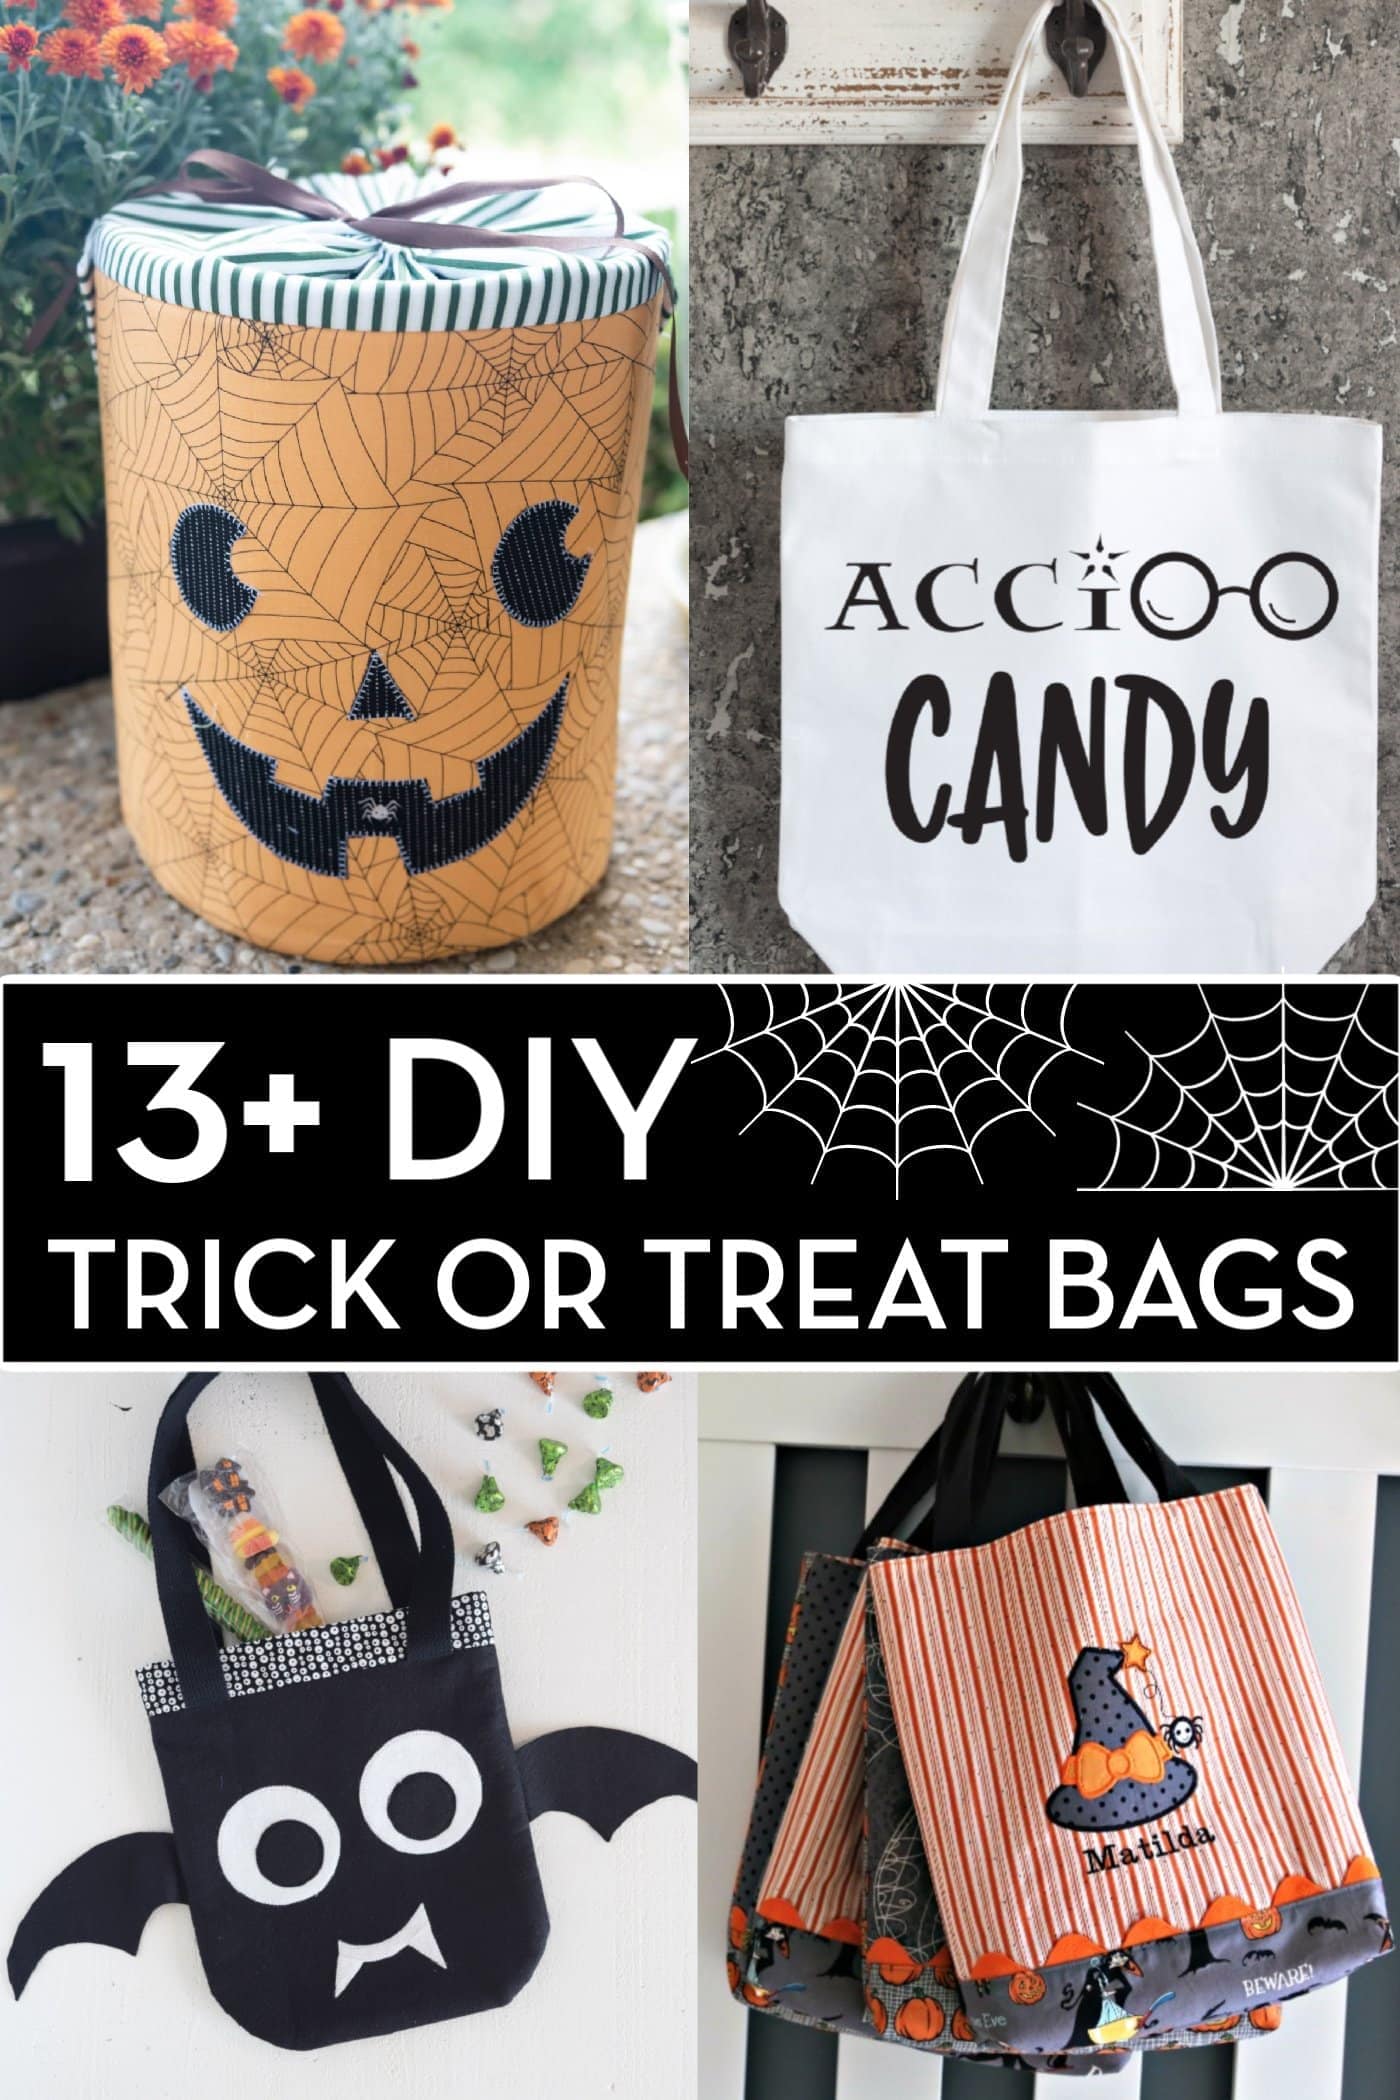 How to Make 20 Halloween Treat Bags to Give as Gifts